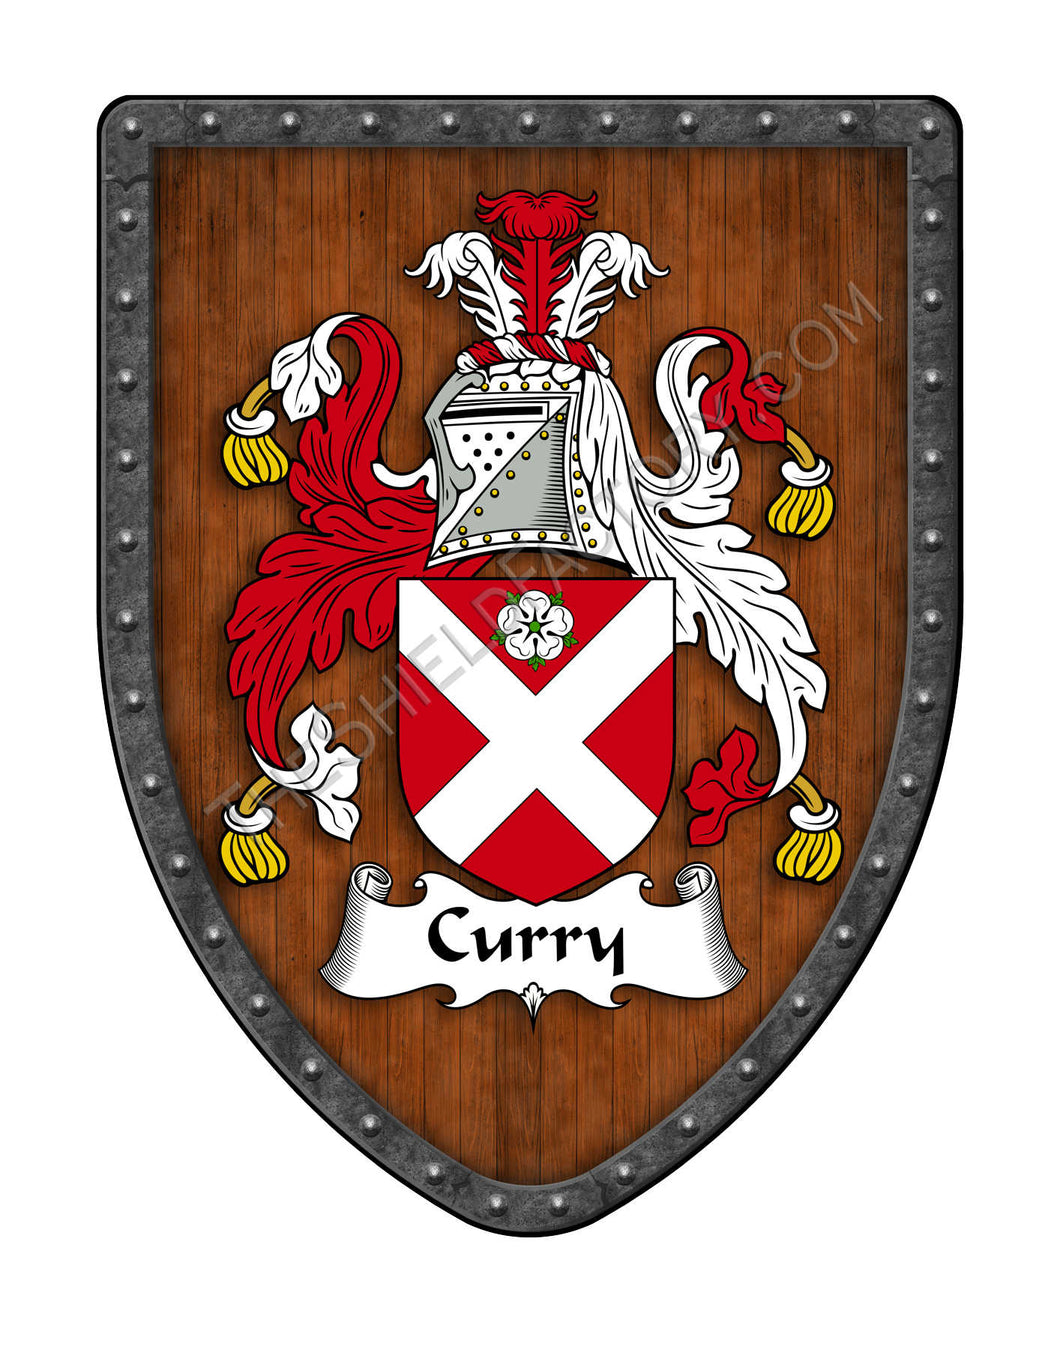 Curry Coat of Arms Shield Family Crest